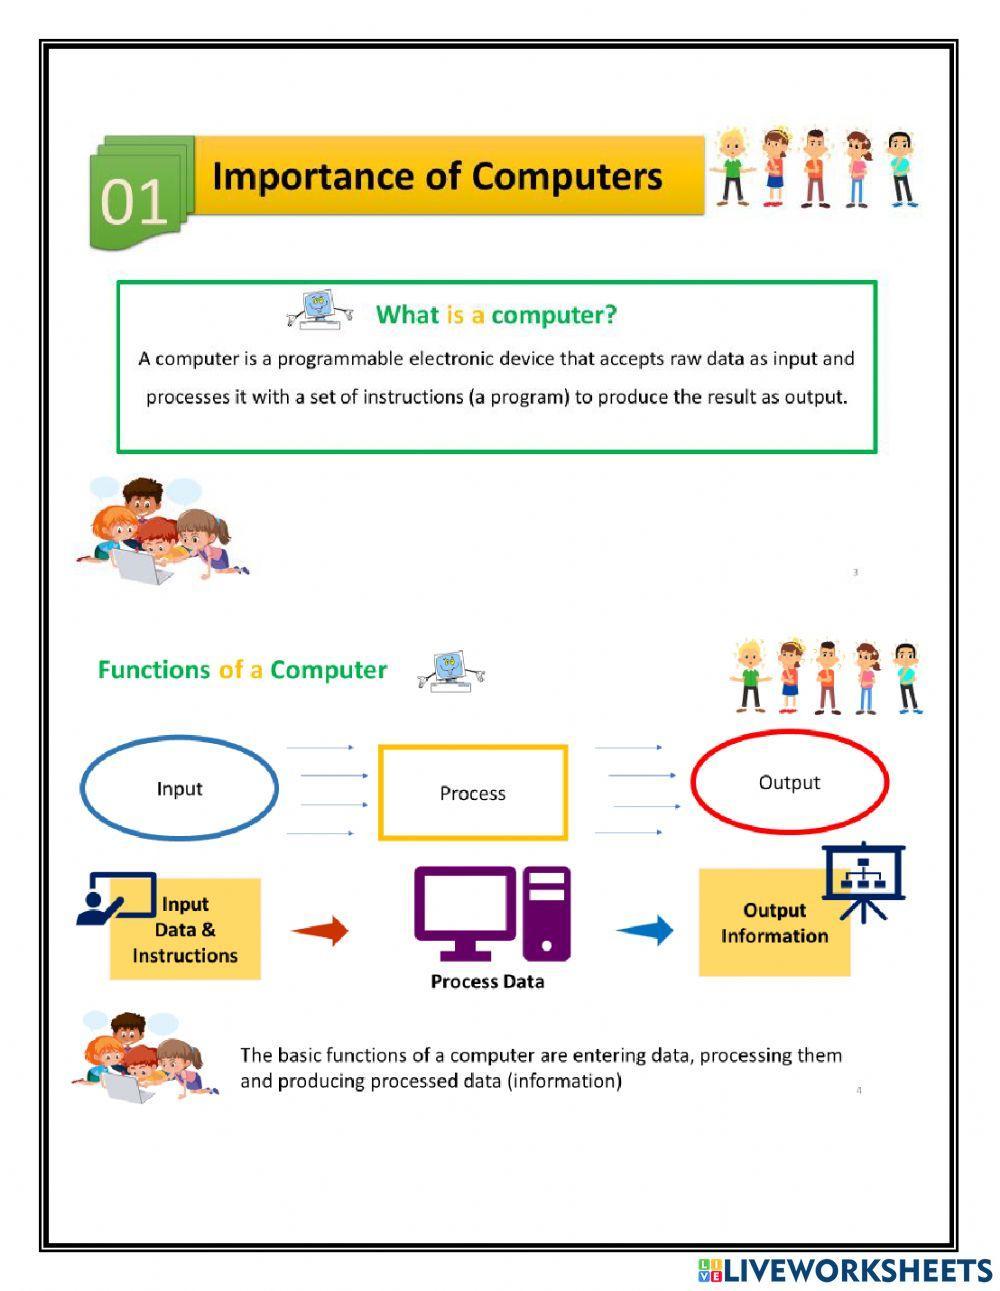 Importance of the computer